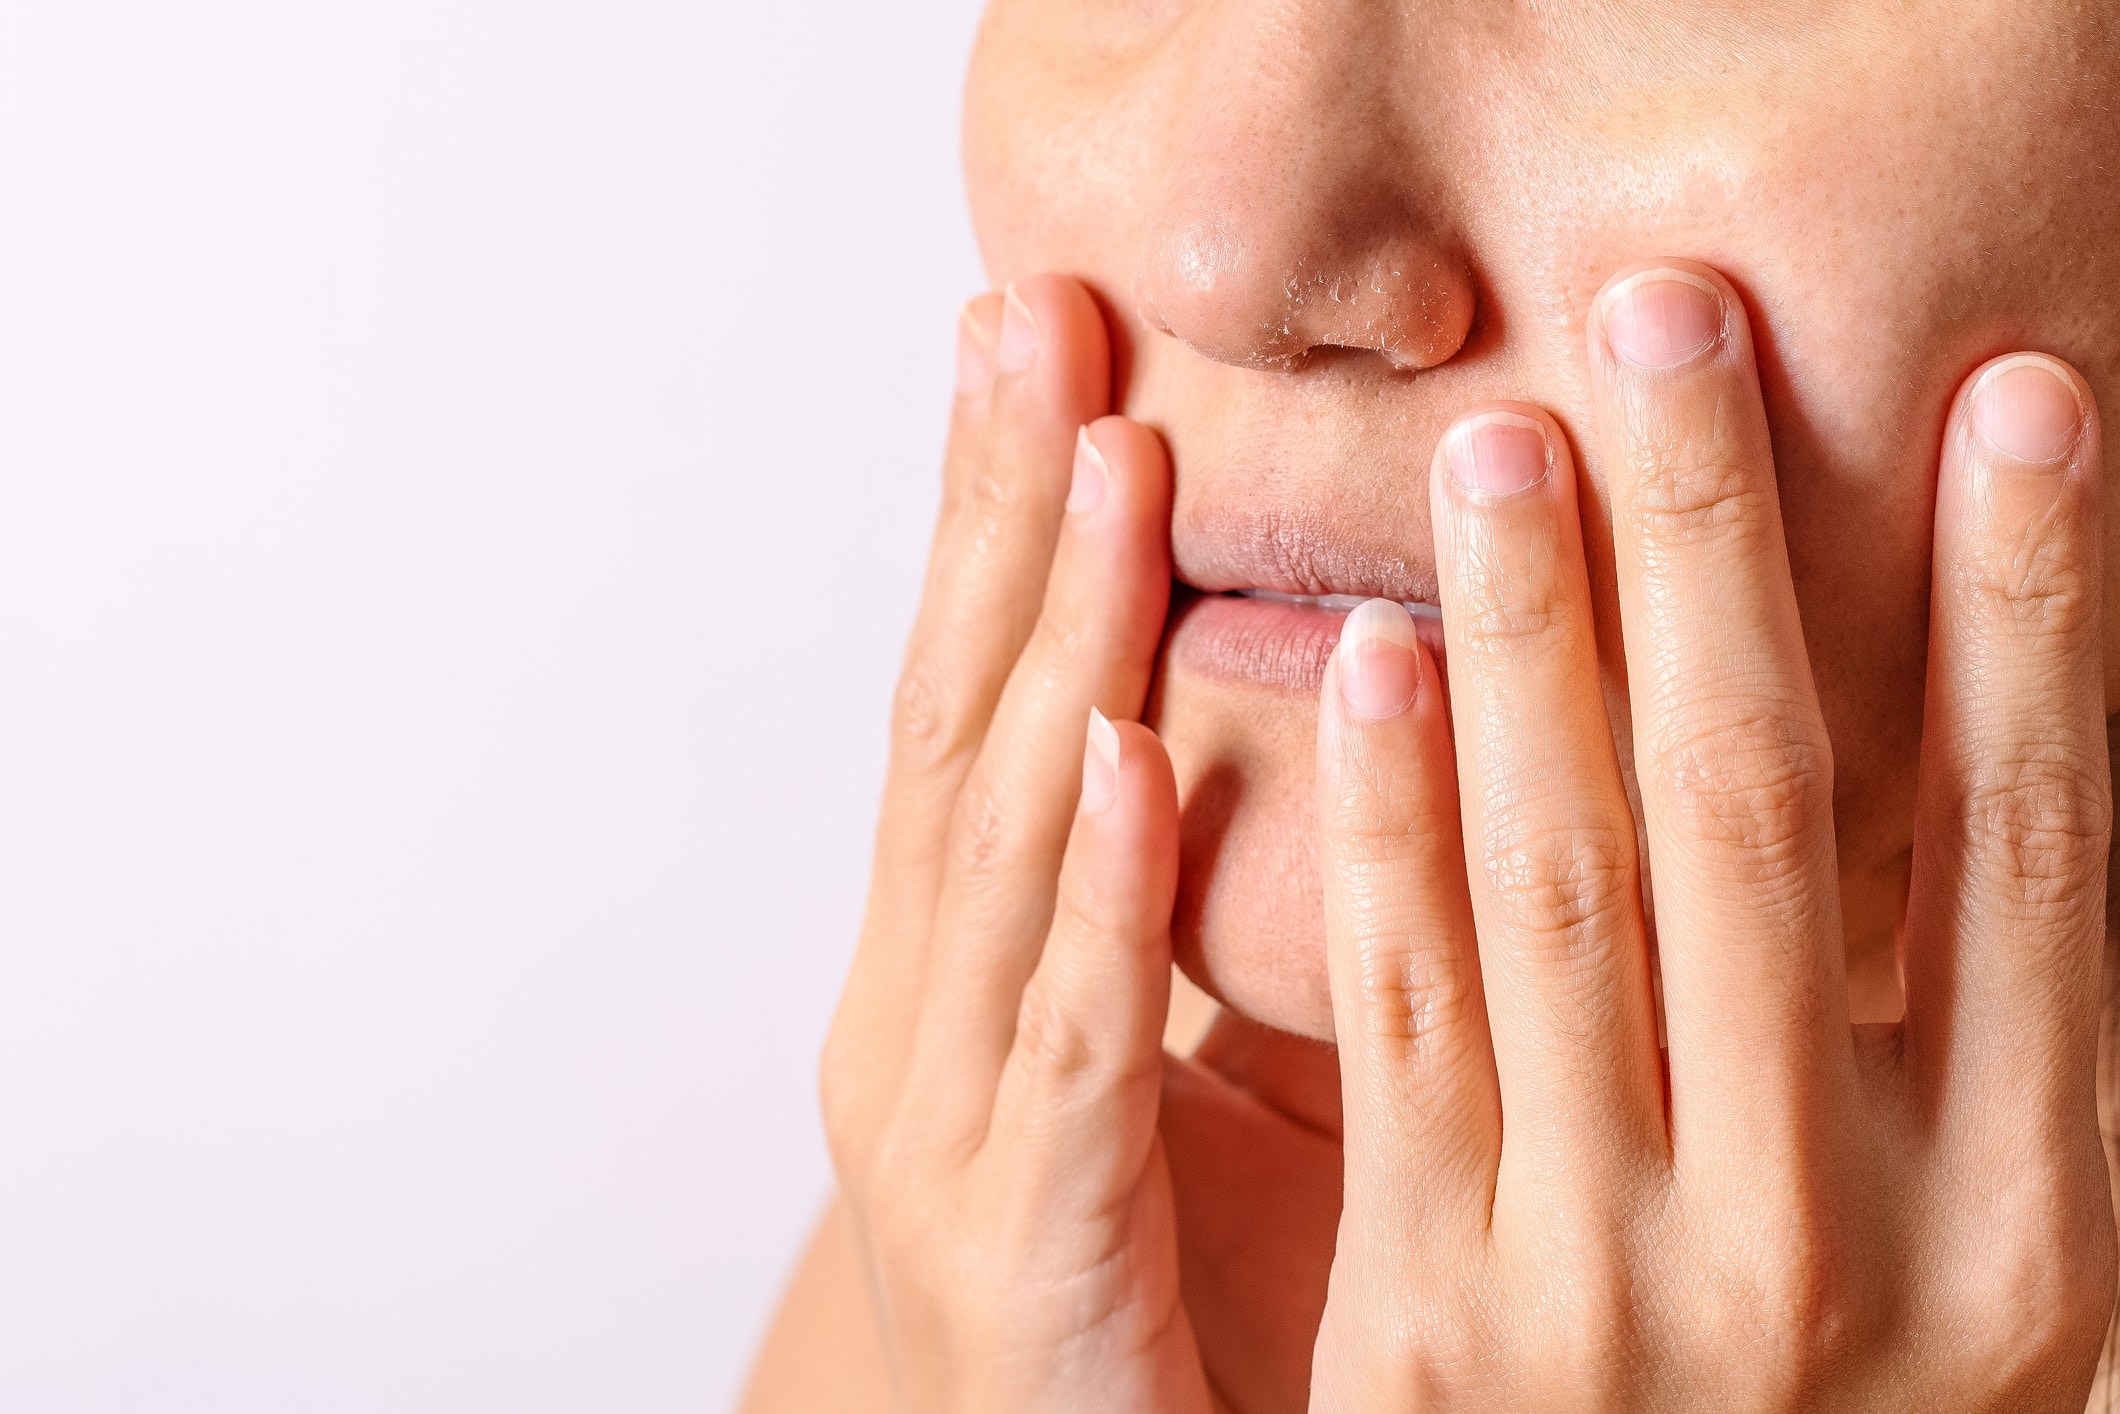 A woman, possibly suffering from xerostomia - commonly known as dry mouth - touches her face with her hands in discomfort.